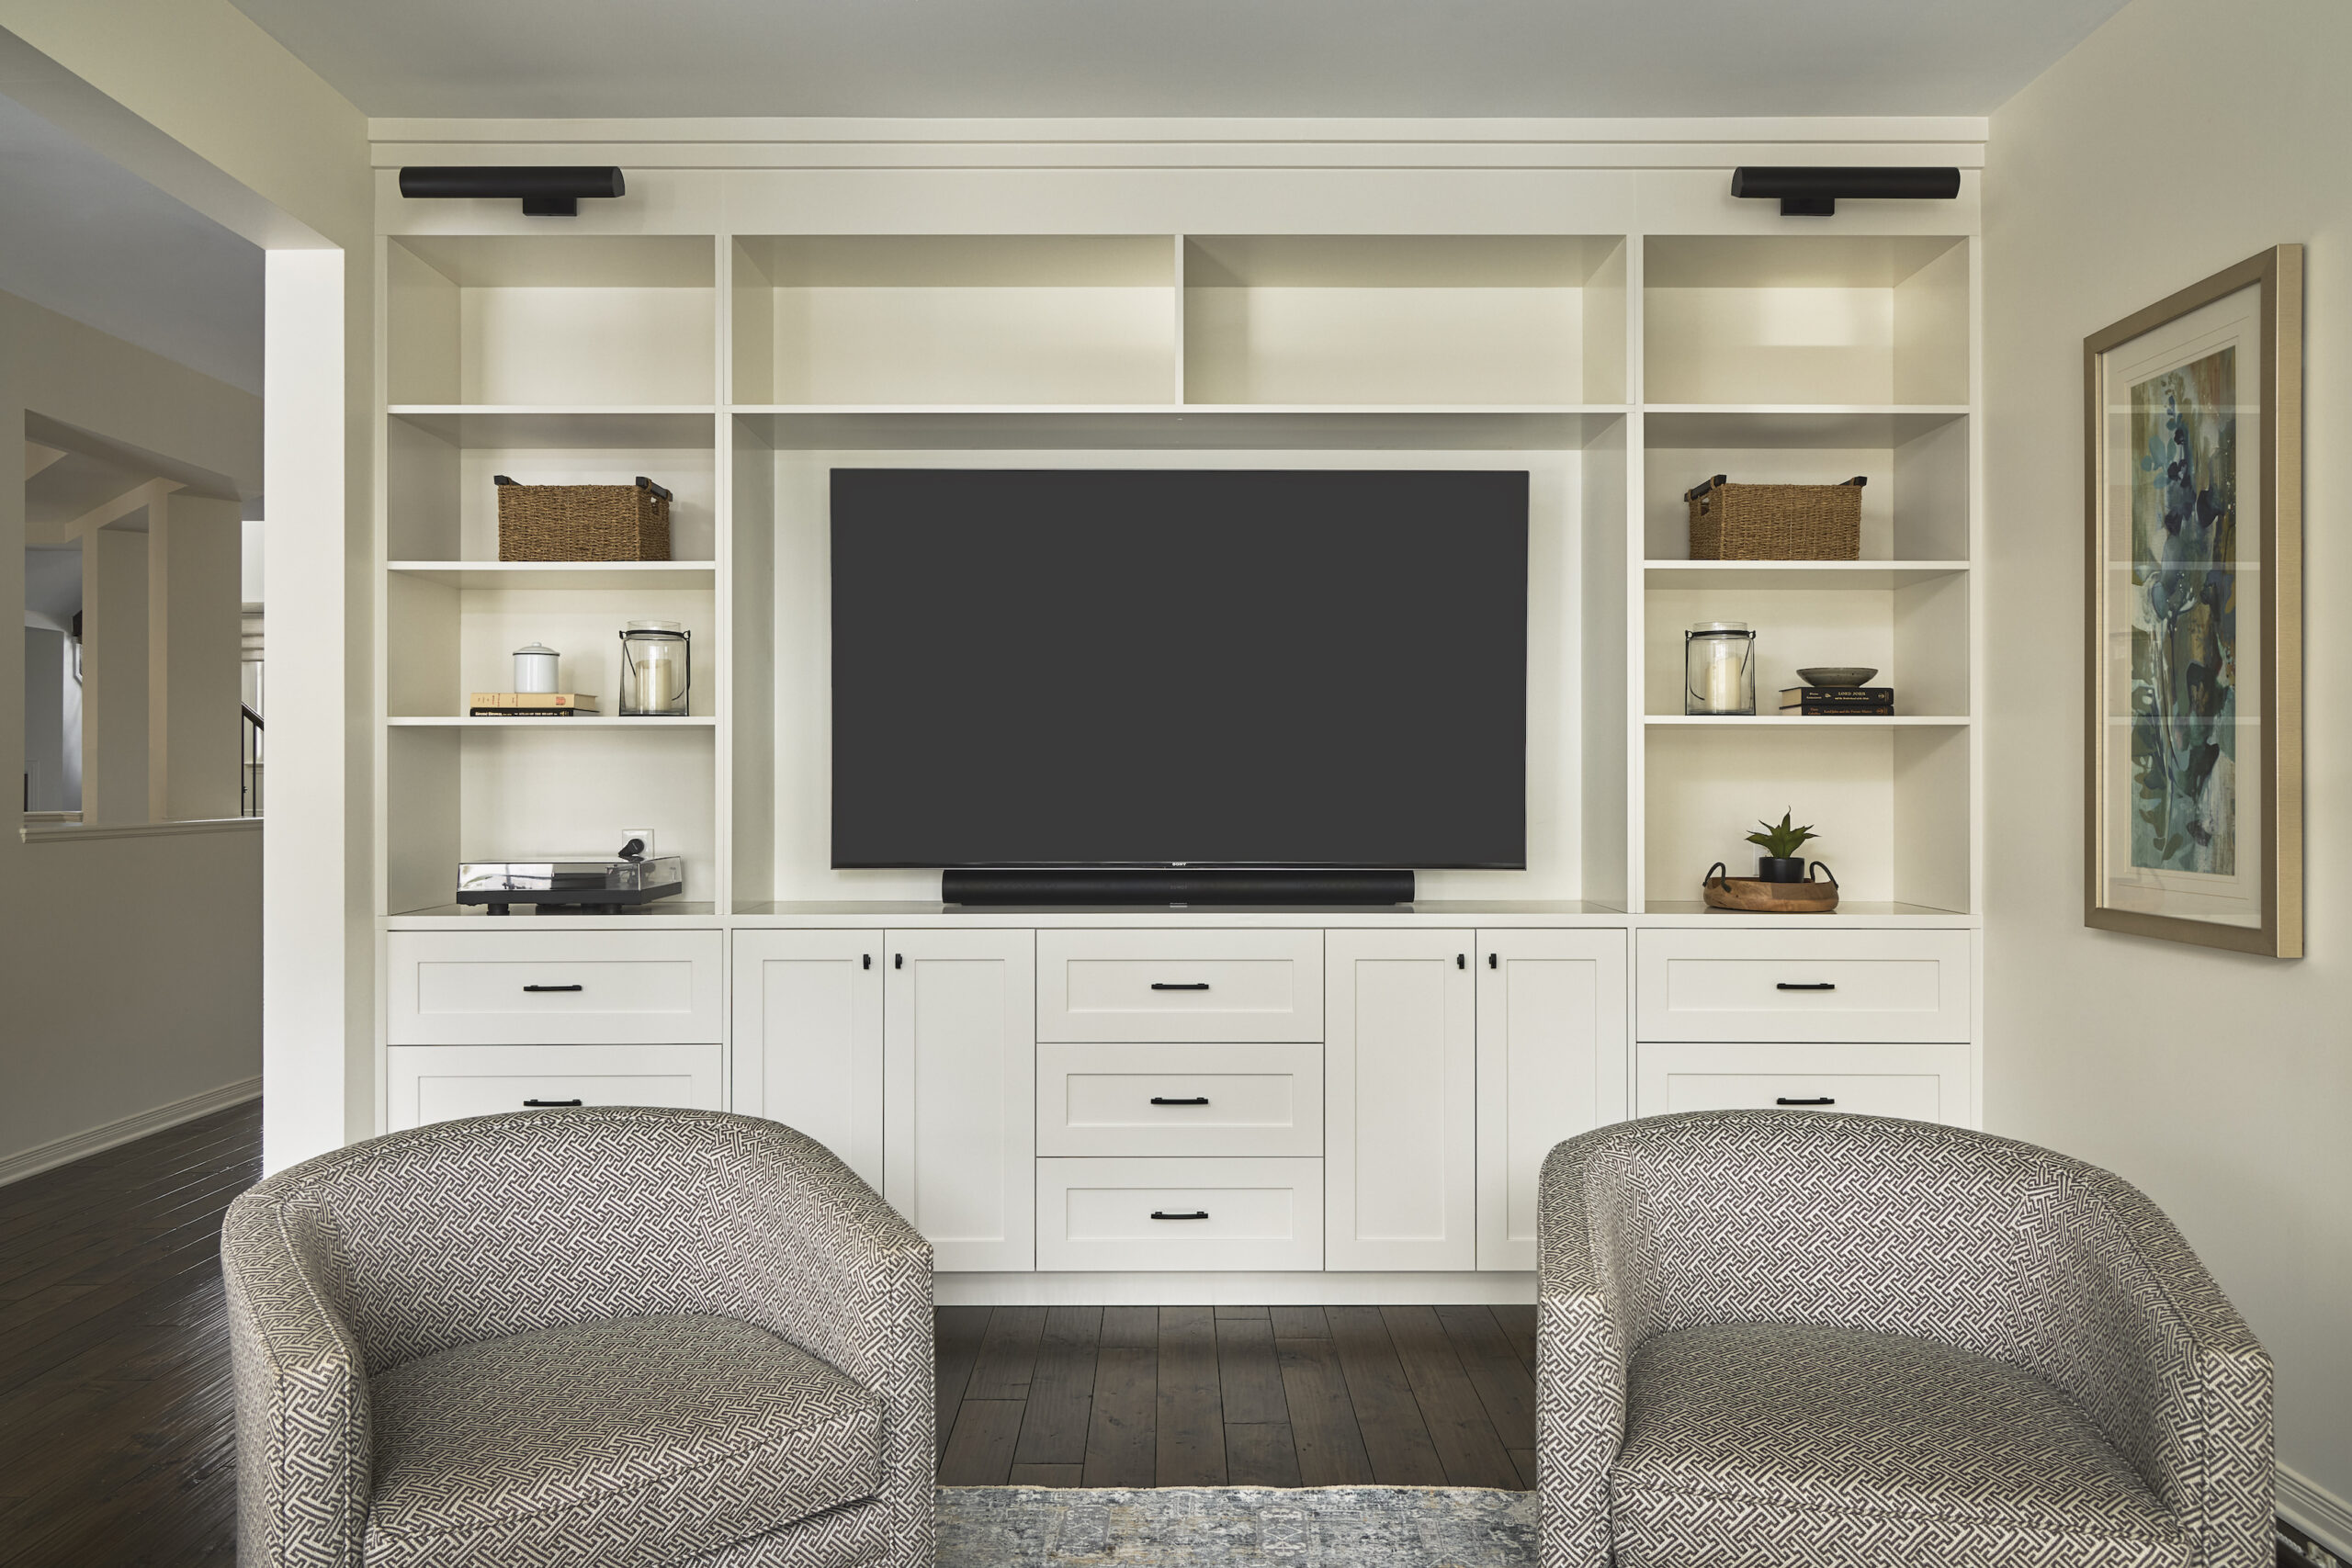 Crisp white custom cabinets serve as an entertainment unit. There are open shelves for memorabilia and closed cabinets and drawers on the bottom to store tv remotes and game consoles.